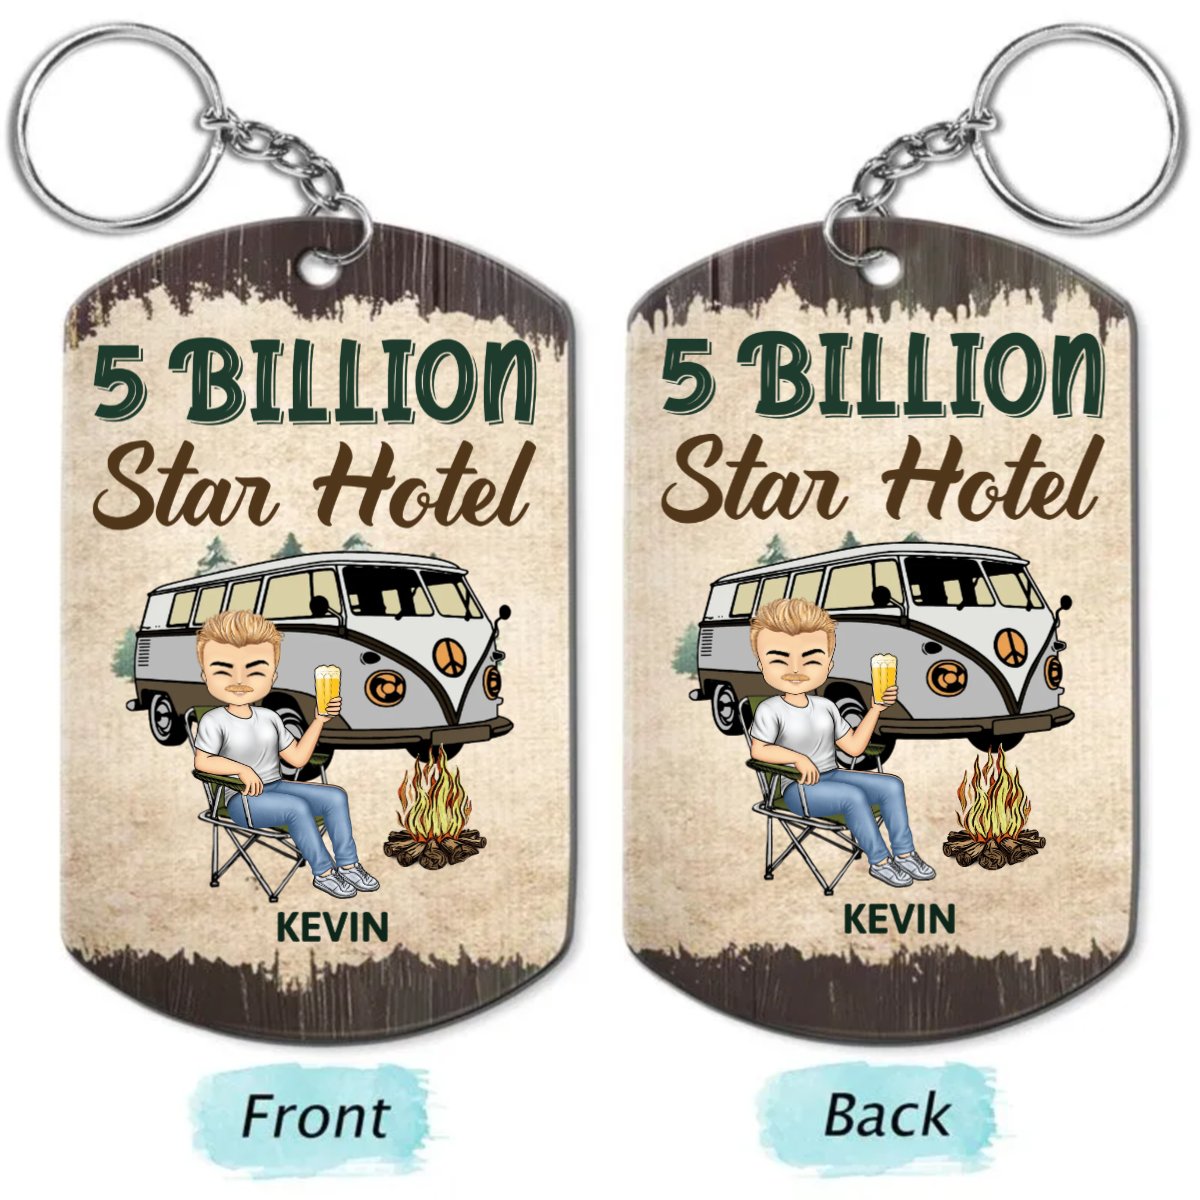 Camping Lovers - Keys To The Camper - Personalized Aluminum Keychain - The Next Custom Gift